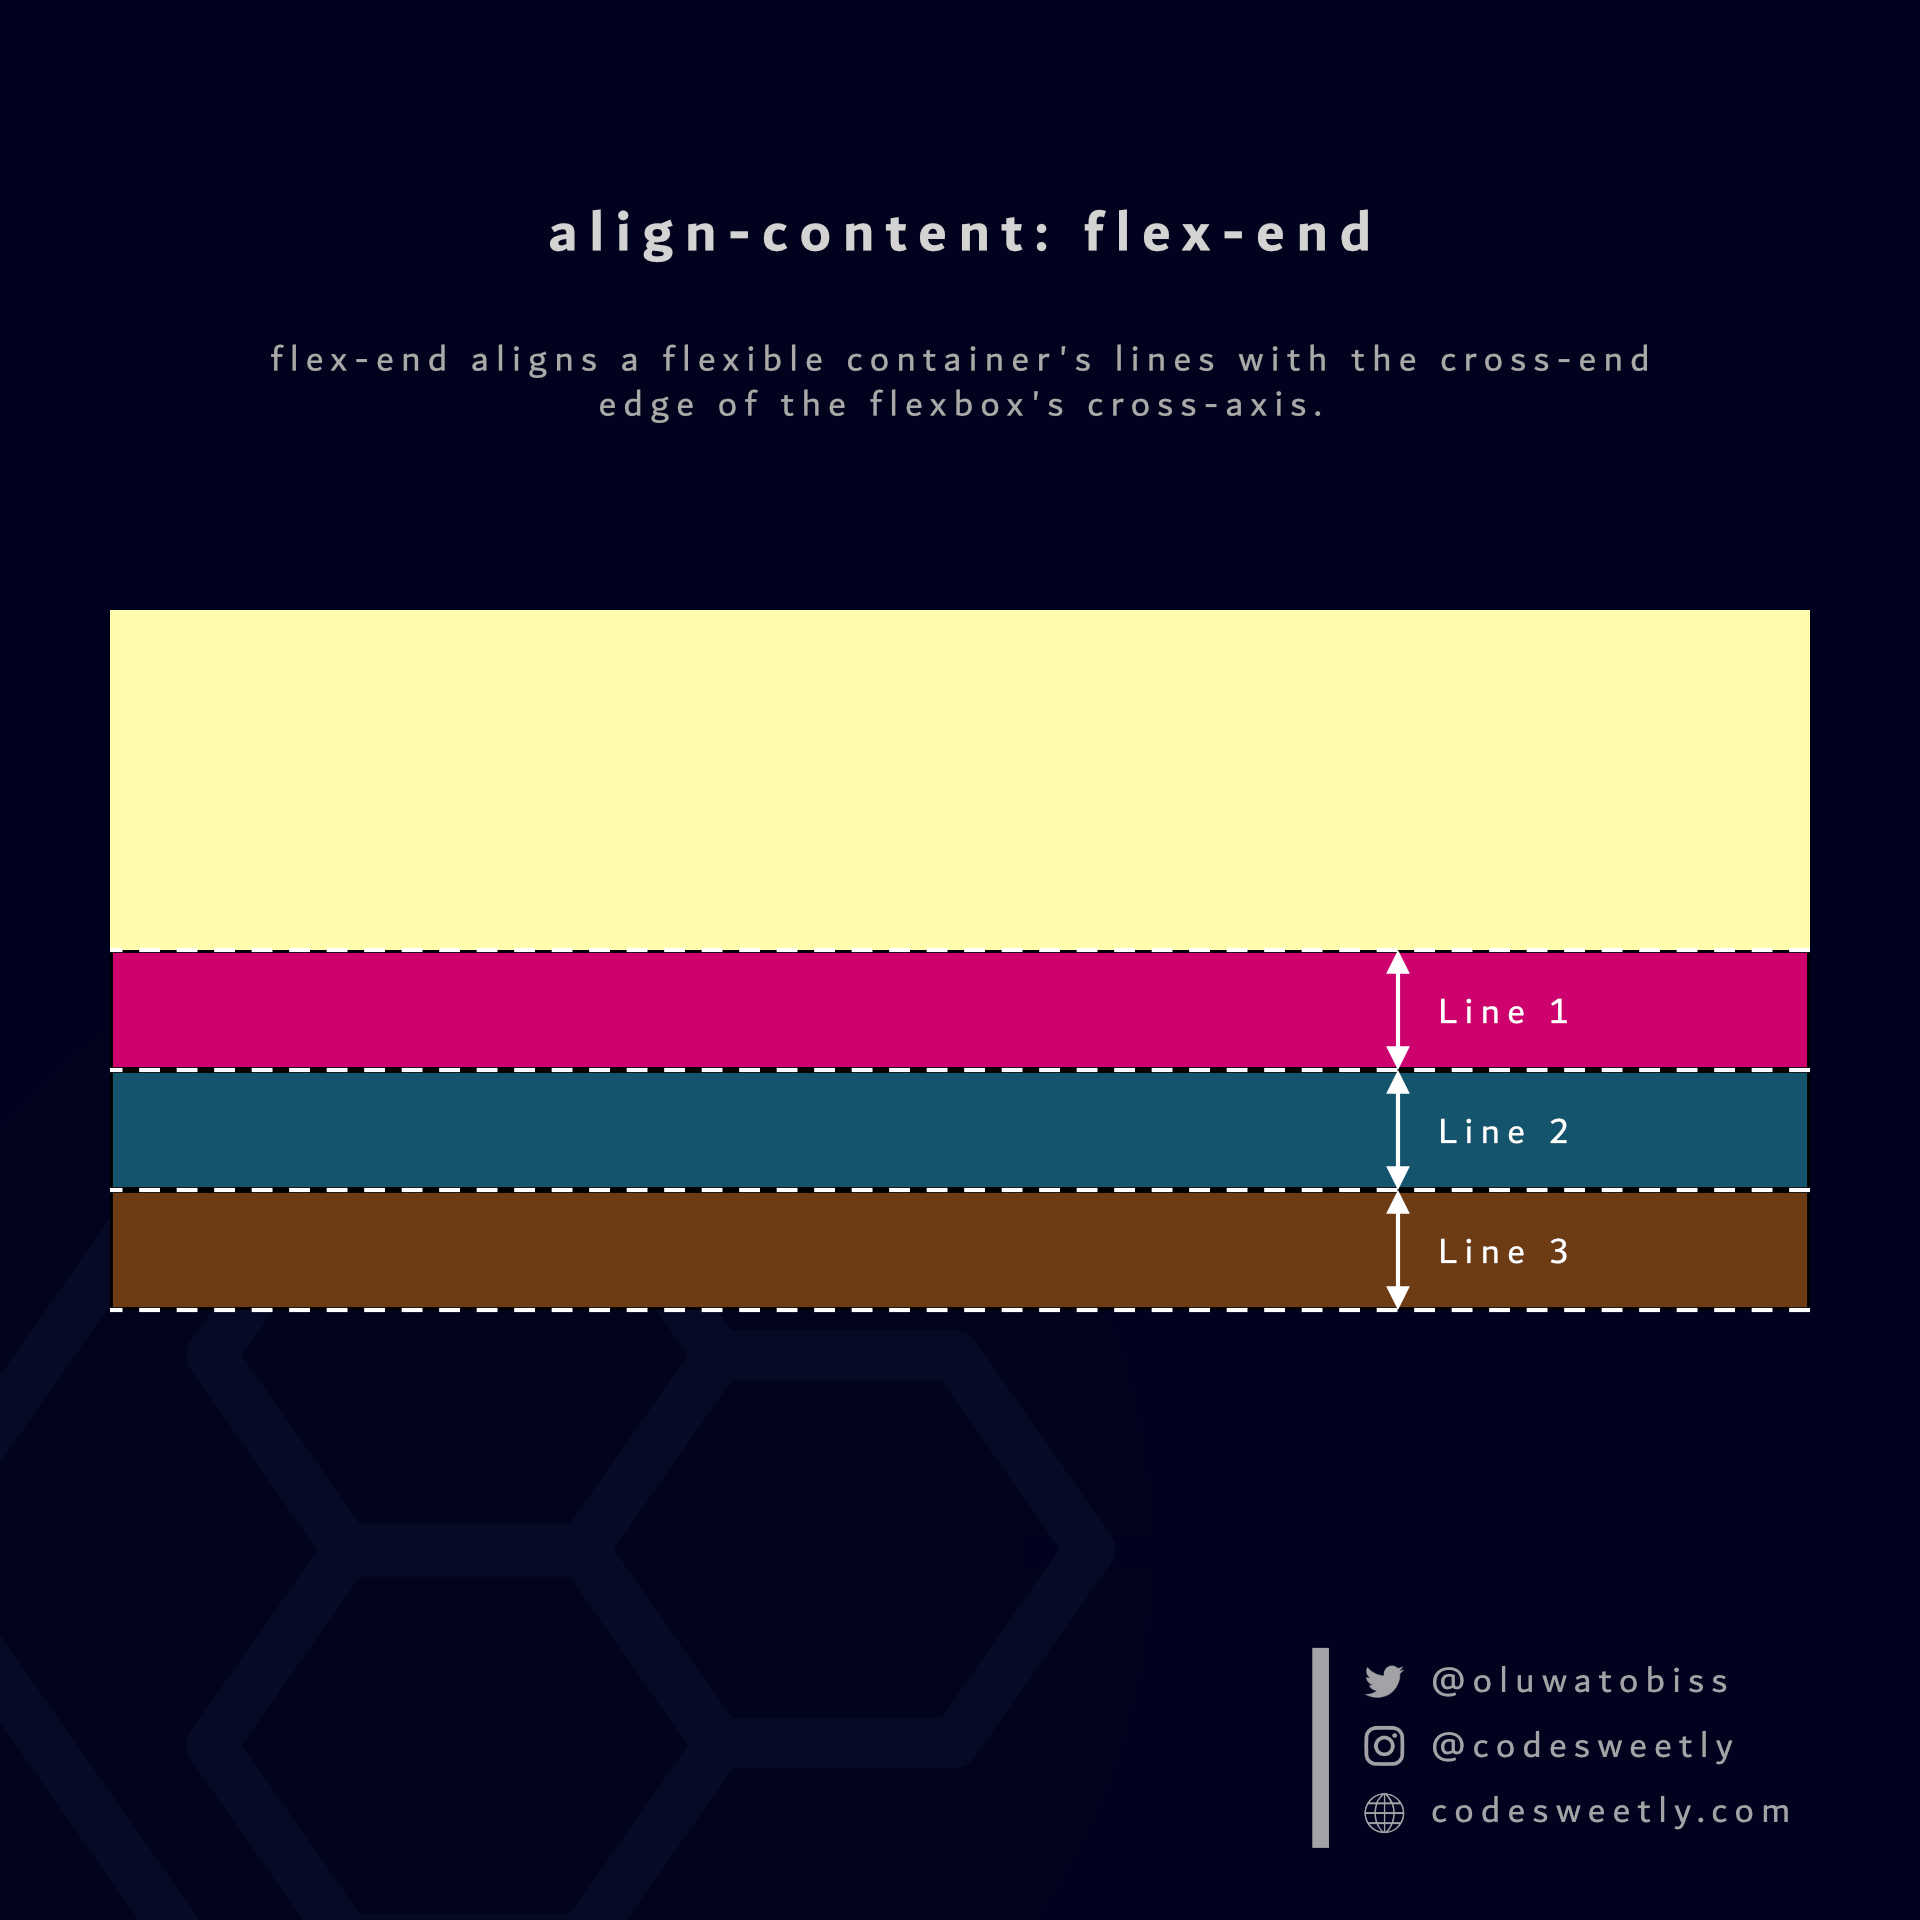 align-content's flex-end value aligns flexbox's lines to the container's cross-end edge